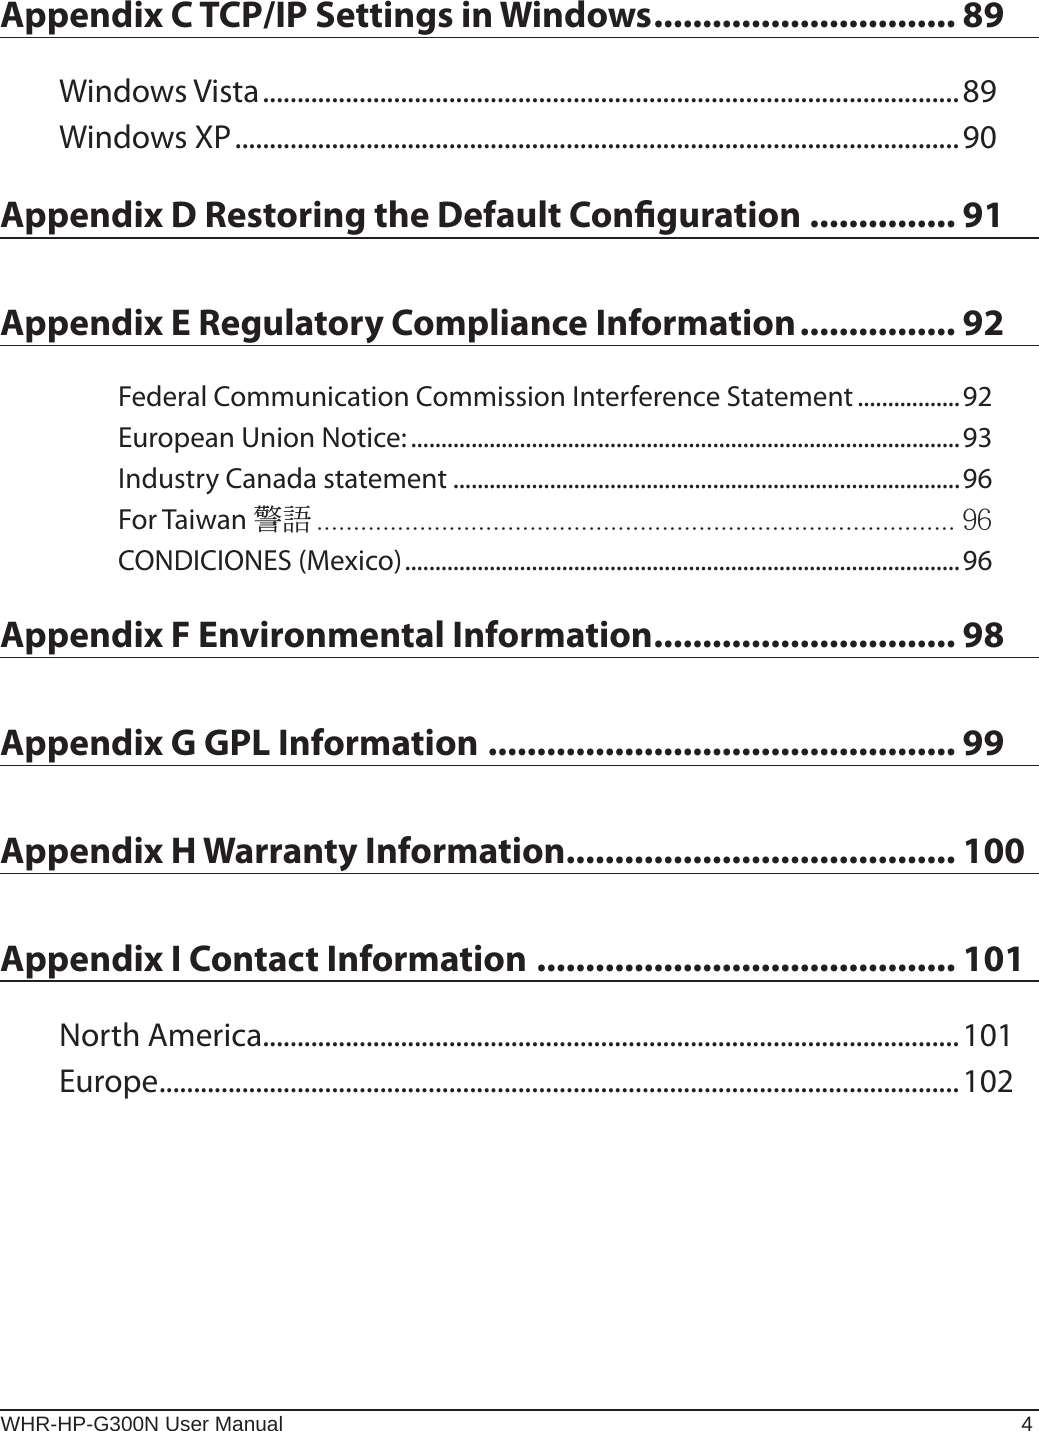 WHR-HP-G300N User Manual 4Appendix C TCP/IP Settings in Windows ............................... 89Windows Vista .....................................................................................................89Windows XP .........................................................................................................90Appendix D Restoring the Default Conguration ............... 91Appendix E Regulatory Compliance Information ................ 92Federal Communication Commission Interference Statement .................92European Union Notice: ...........................................................................................93Industry Canada statement ....................................................................................96For Taiwan  CONDICIONES (Mexico) ............................................................................................96Appendix F Environmental Information ............................... 98Appendix G GPL Information ................................................ 99Appendix H Warranty Information........................................ 100Appendix I Contact Information ........................................... 101North America.....................................................................................................101Europe ....................................................................................................................102